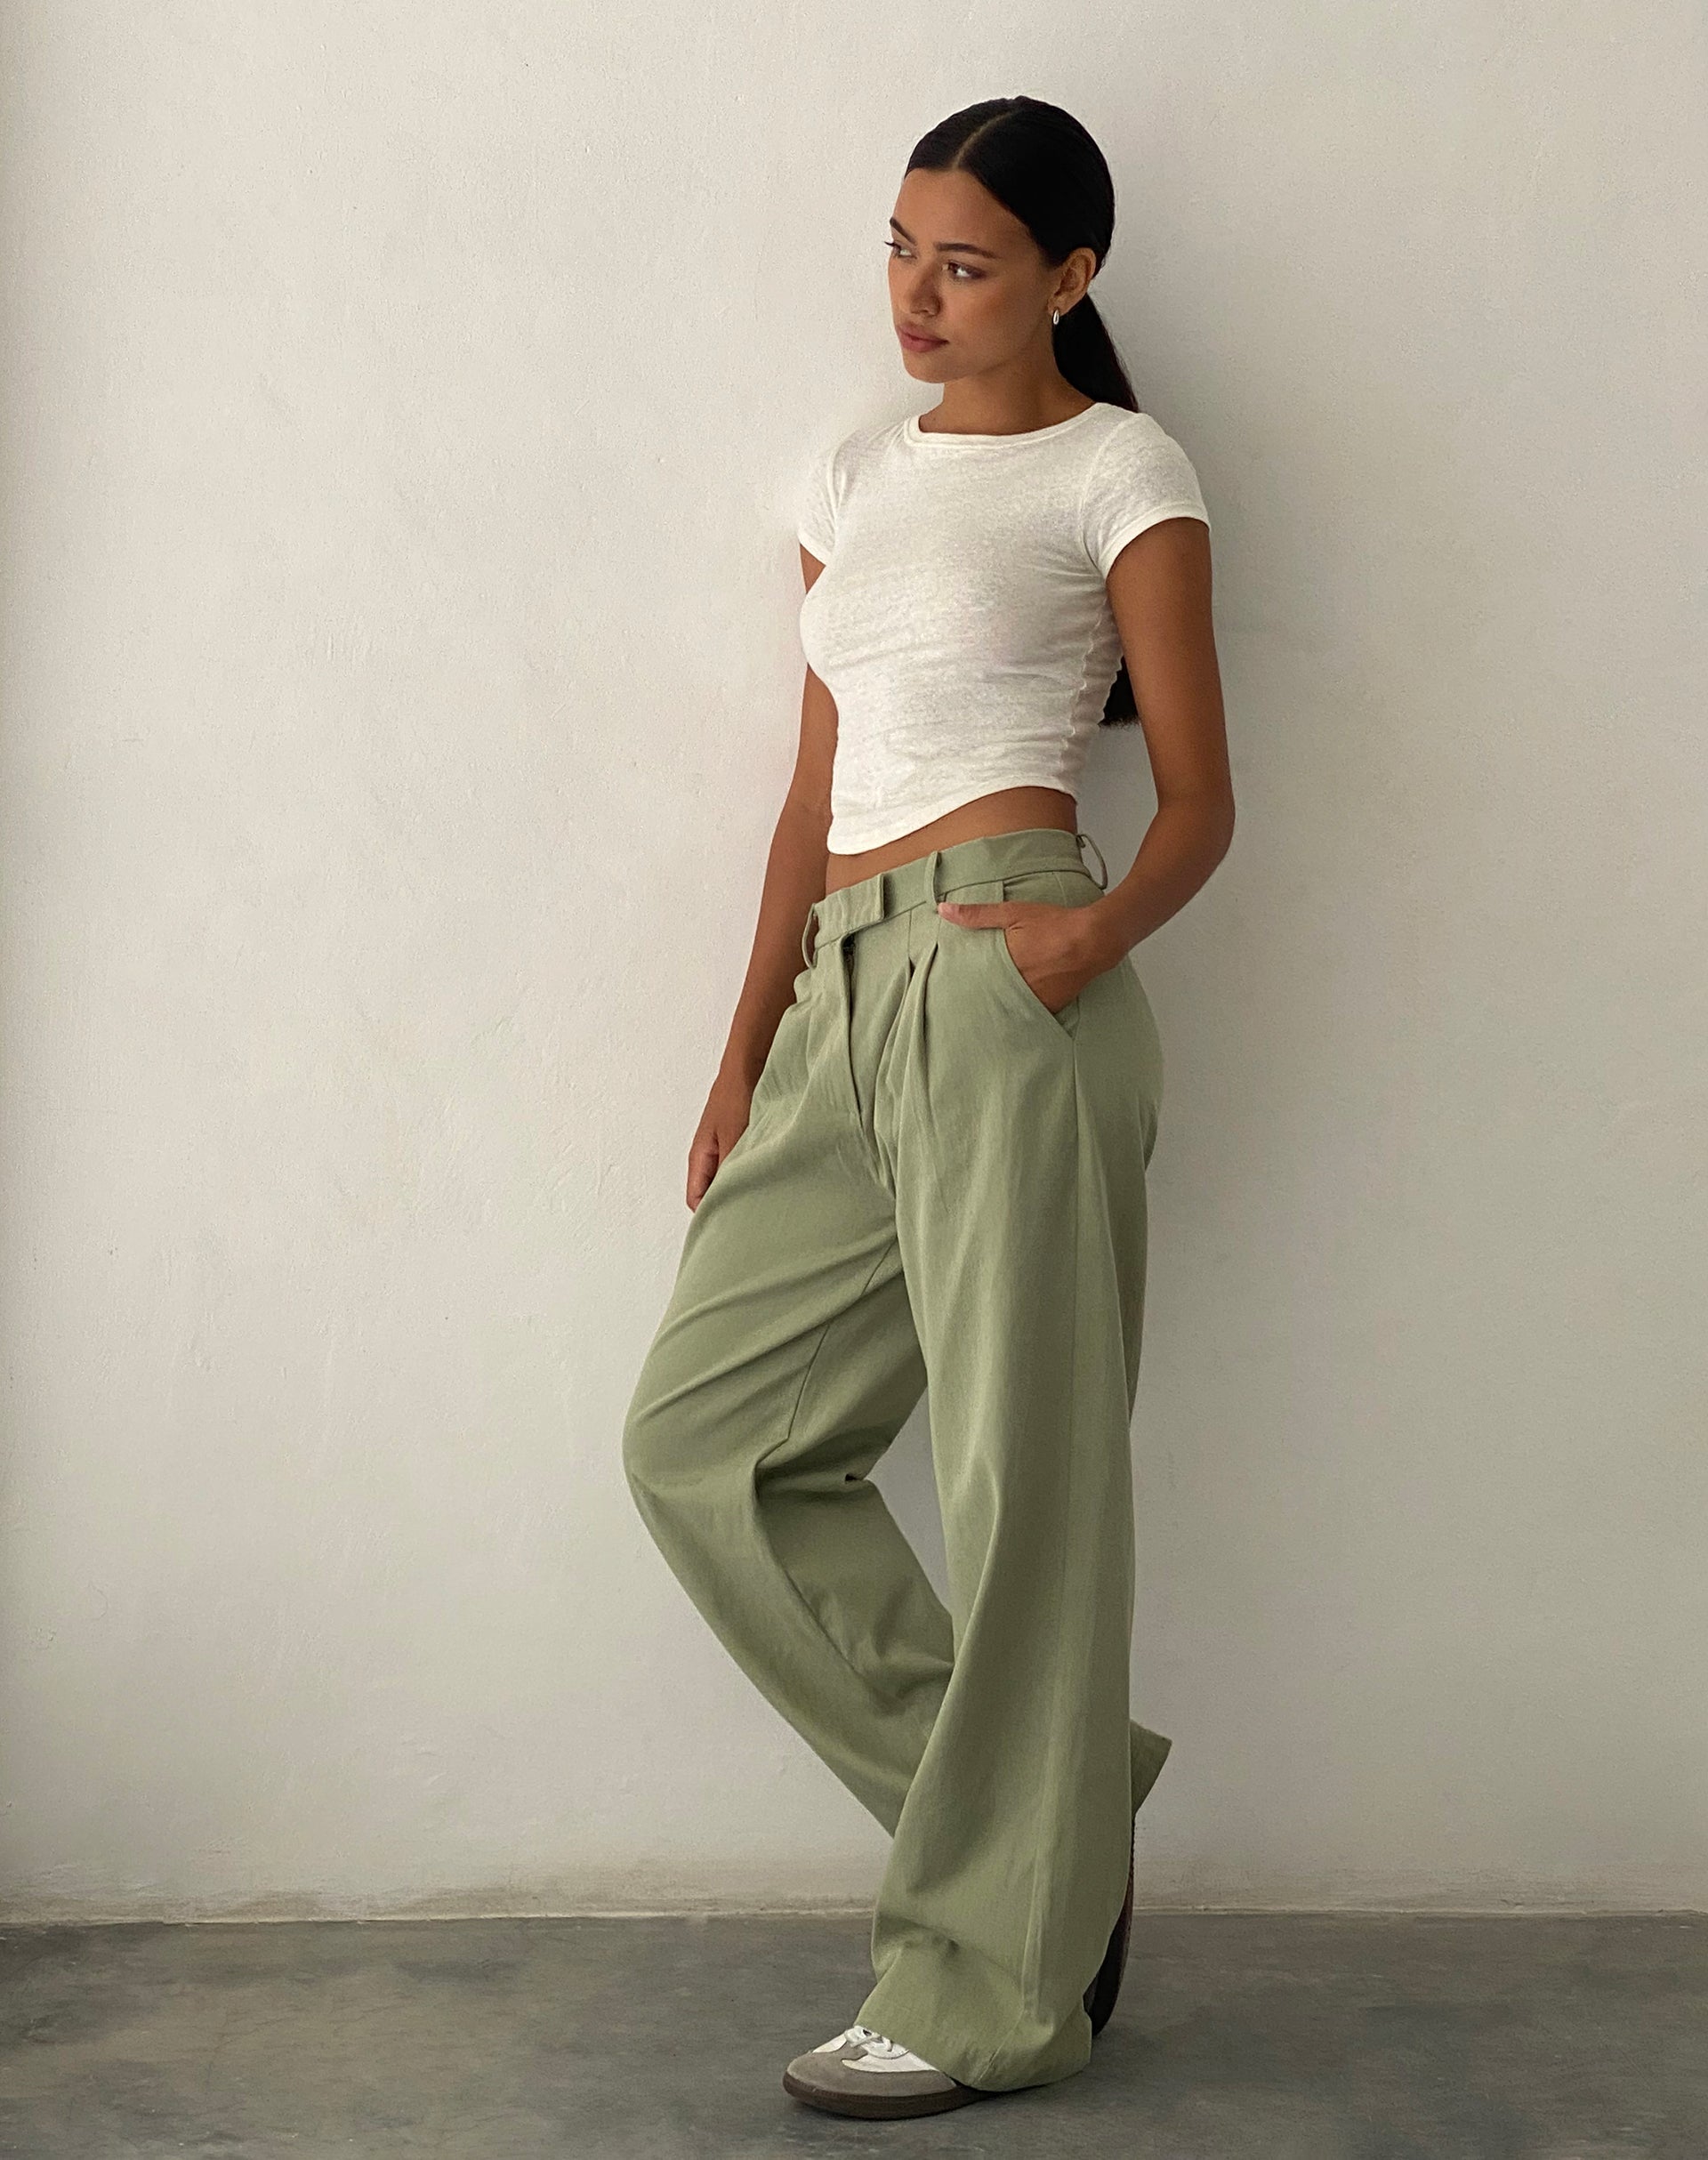 ASOS EDITION super wide leg trouser with tie front co-ord | ASOS